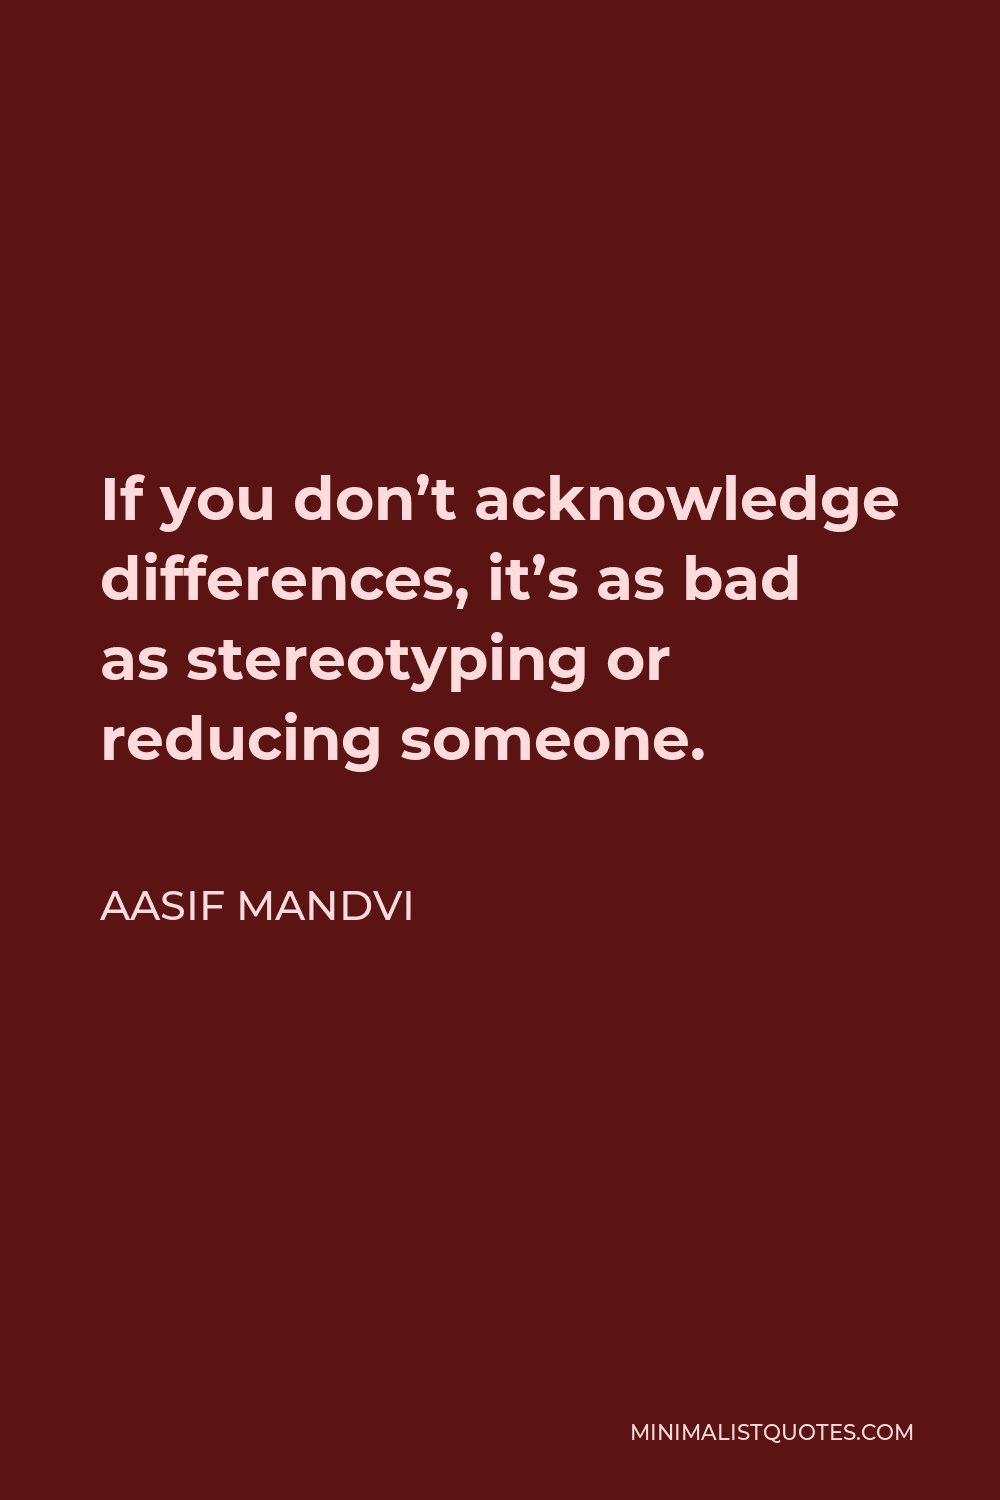 Aasif Mandvi Quote - If you don’t acknowledge differences, it’s as bad as stereotyping or reducing someone.